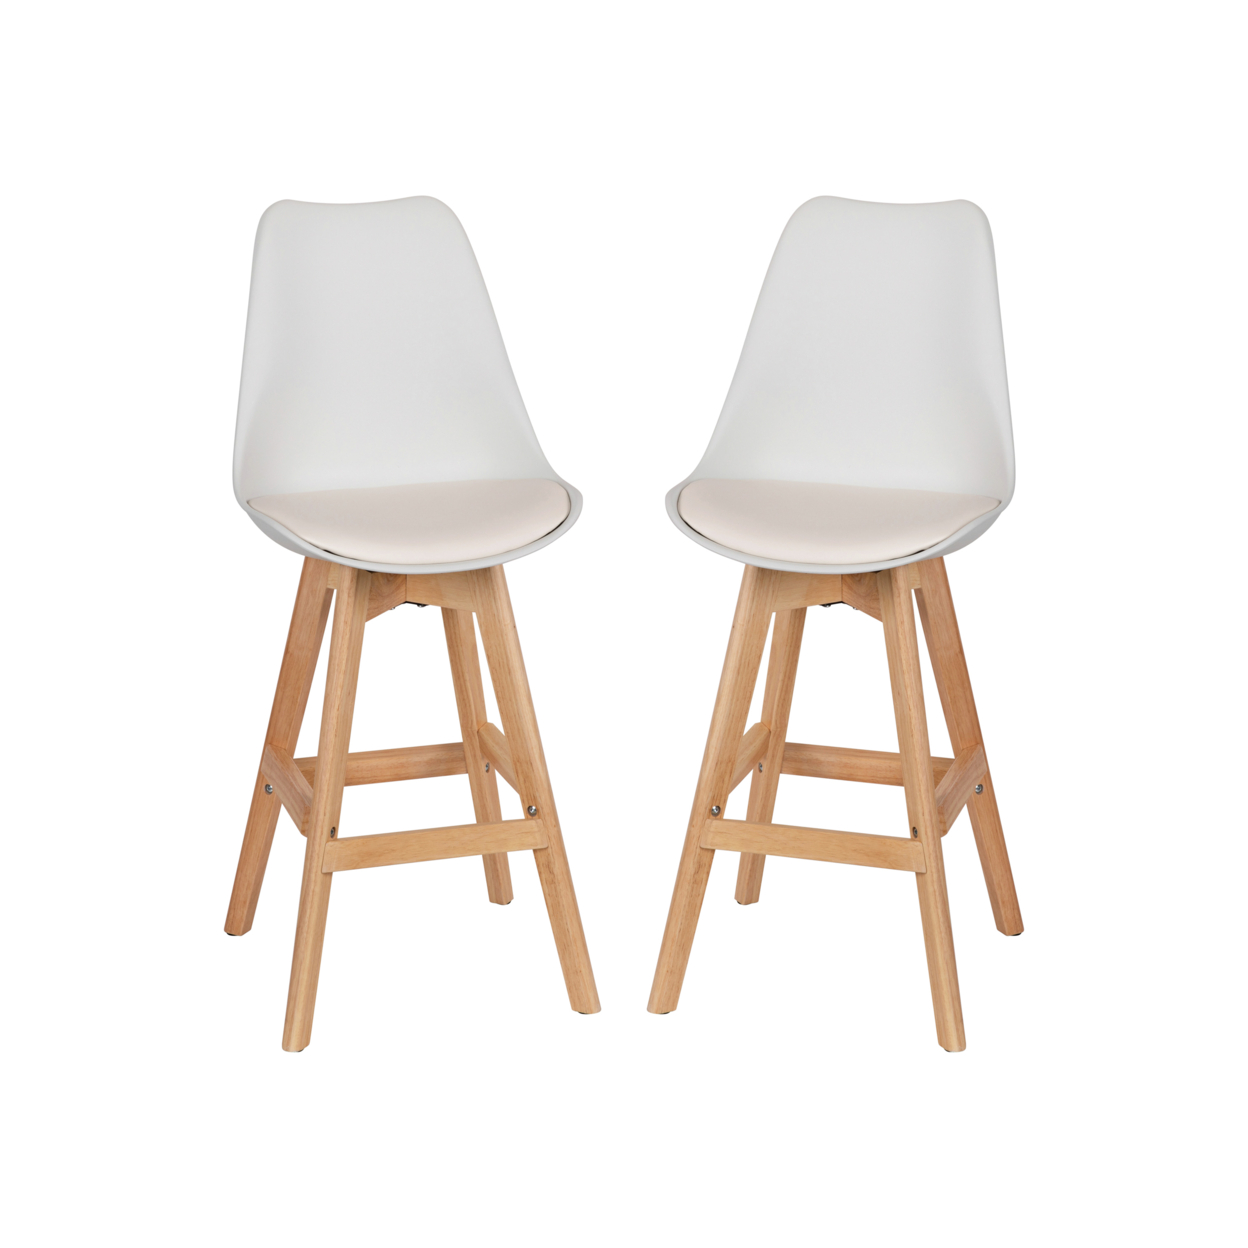 2 Piece 27 Inch Stools, White Leather, Curved Seat And Back